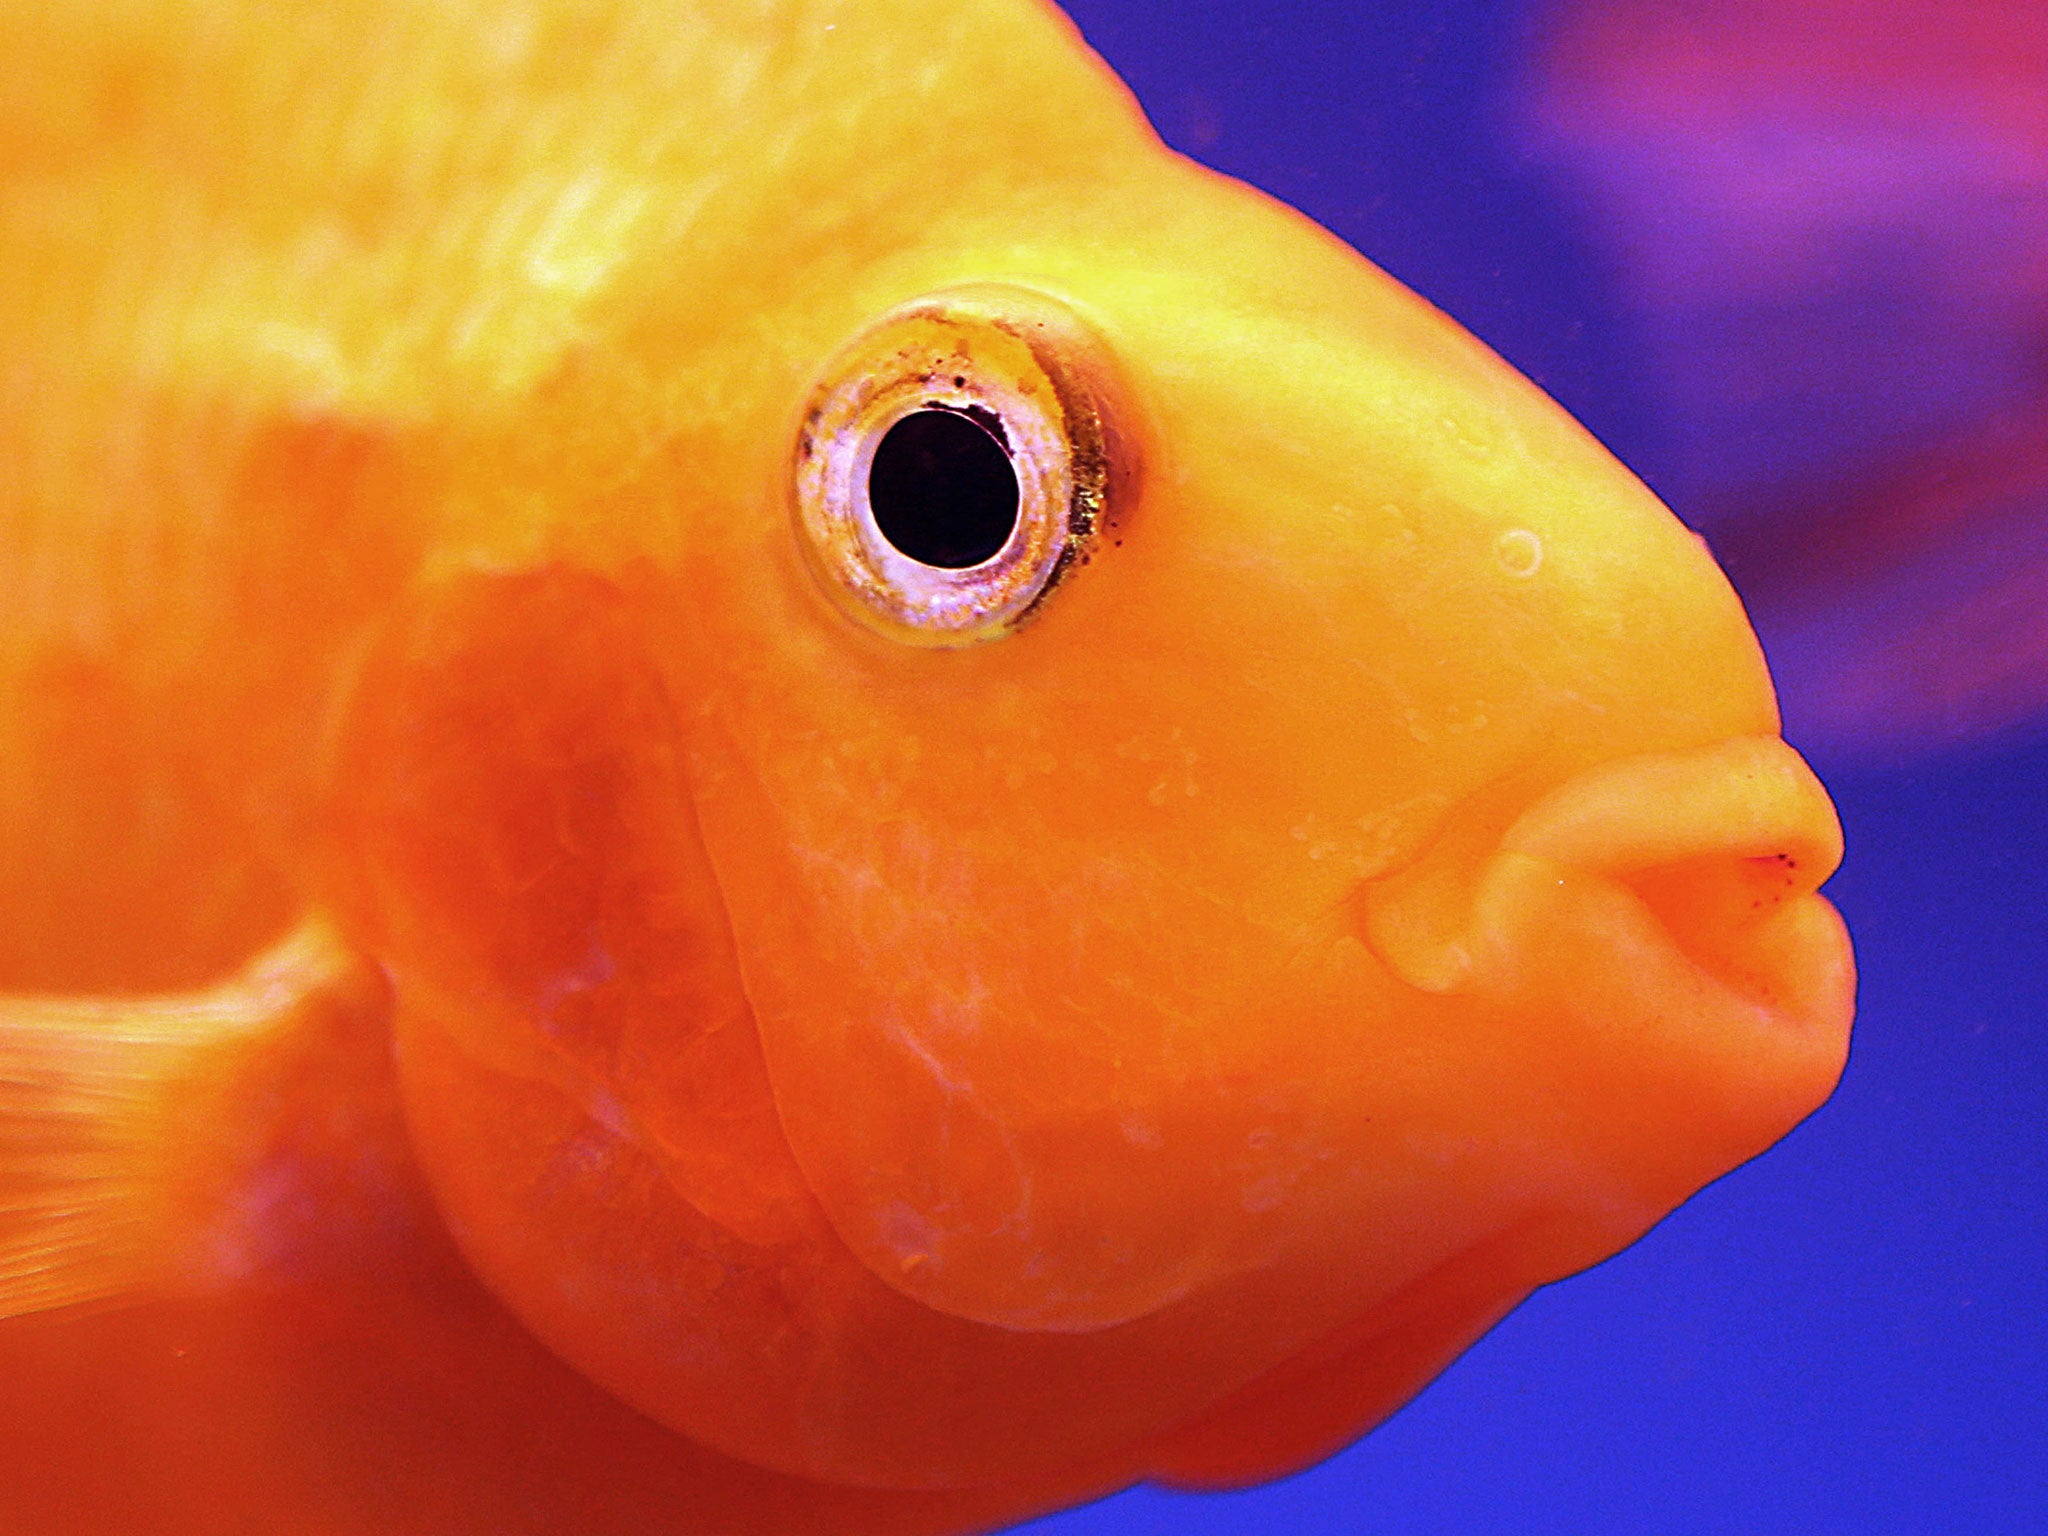 The RSPCA has warned people against drinking goldfish as part of the new "Neknomination" drinking craze